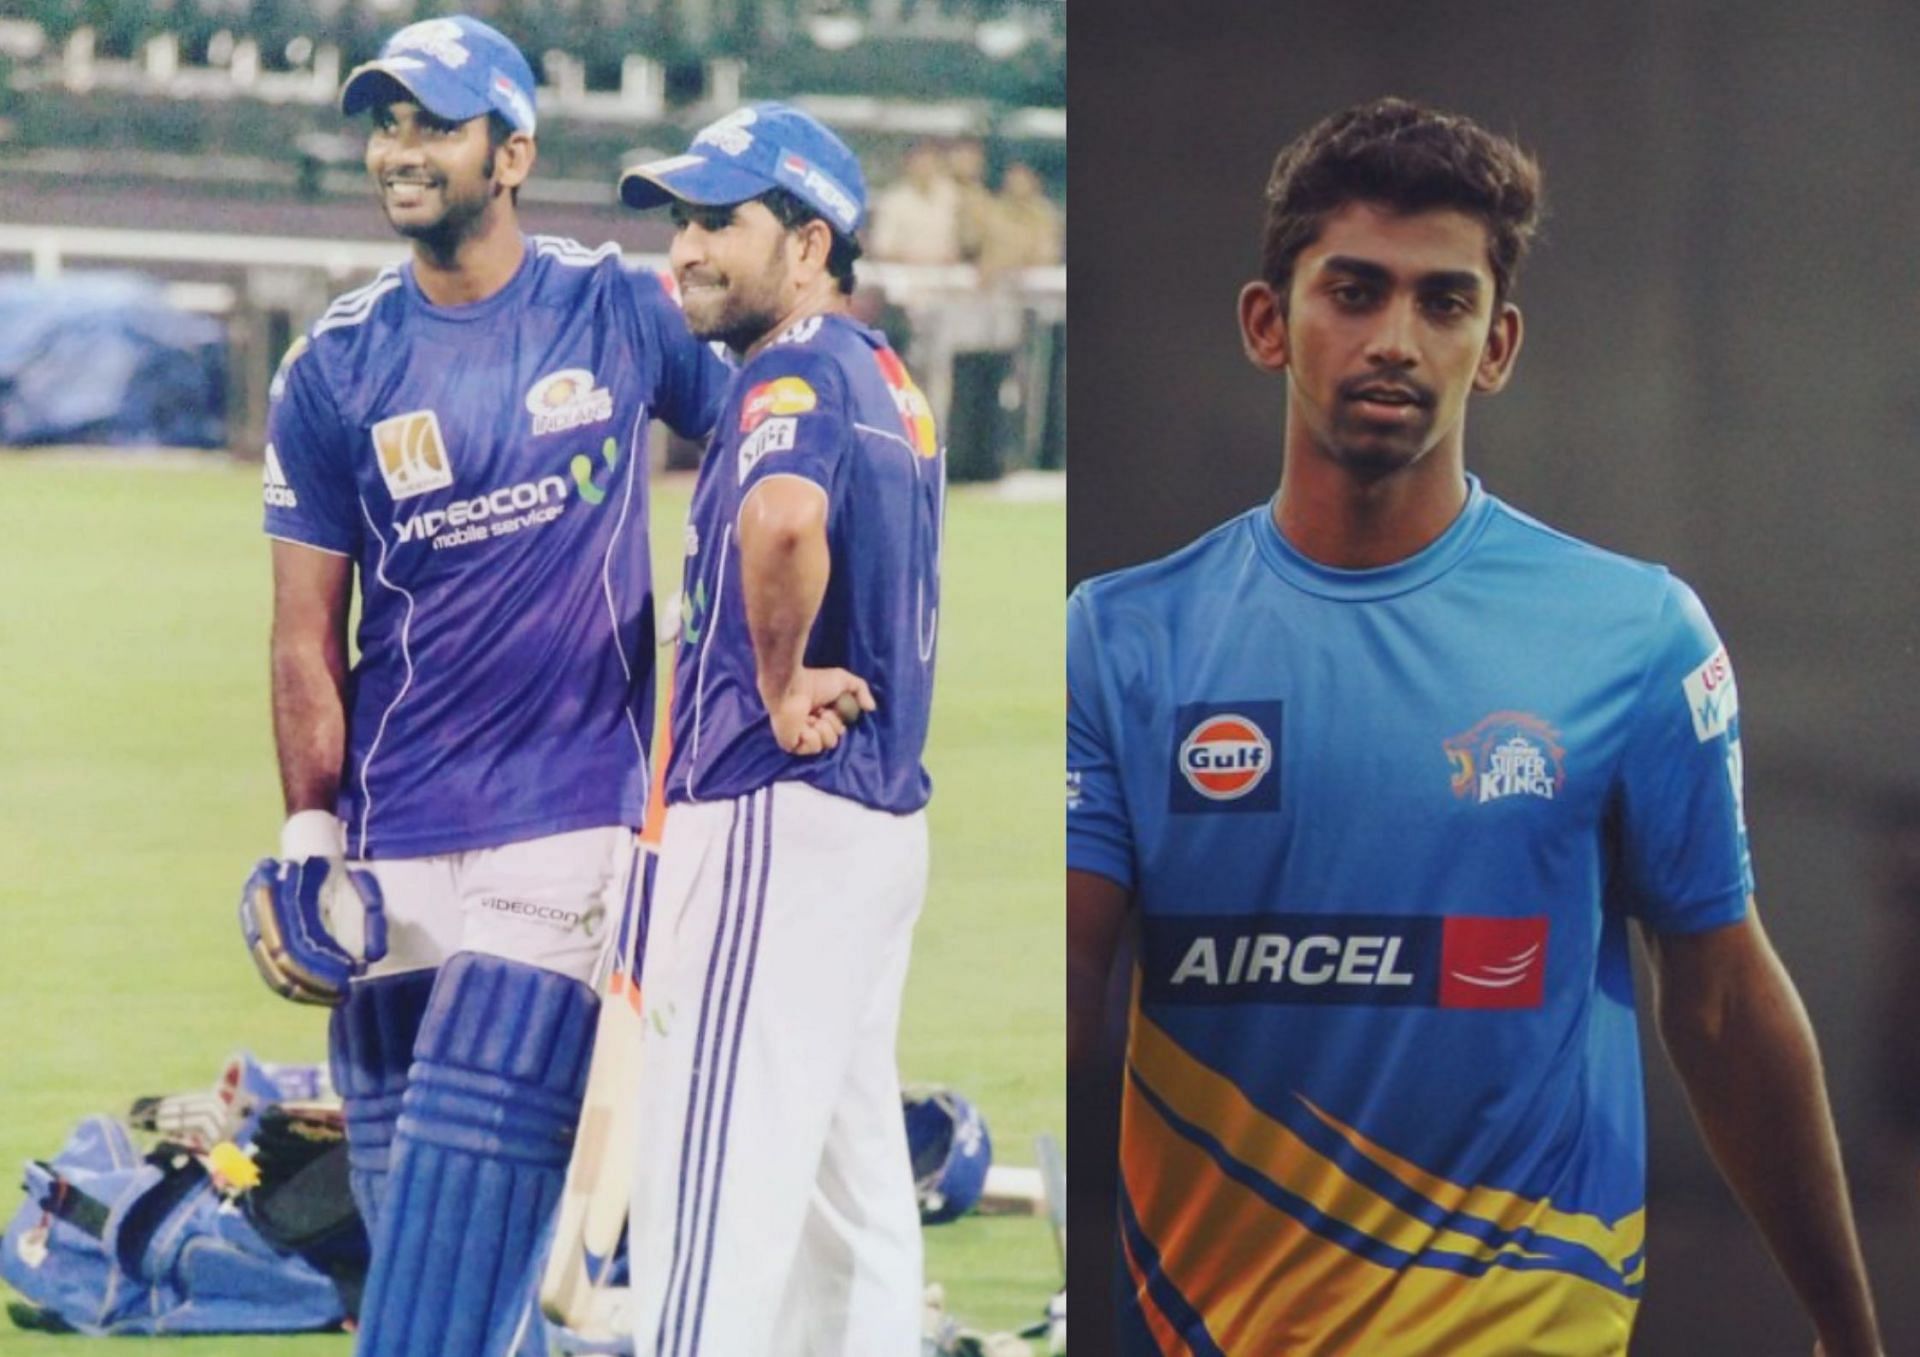 Rajagopal Sathish and Baba Aparajith have rubbed shoulders with the best in the business in the IPL (Picture Credits: Instagram/Rajagopal Sathish, Baba Aparajith).